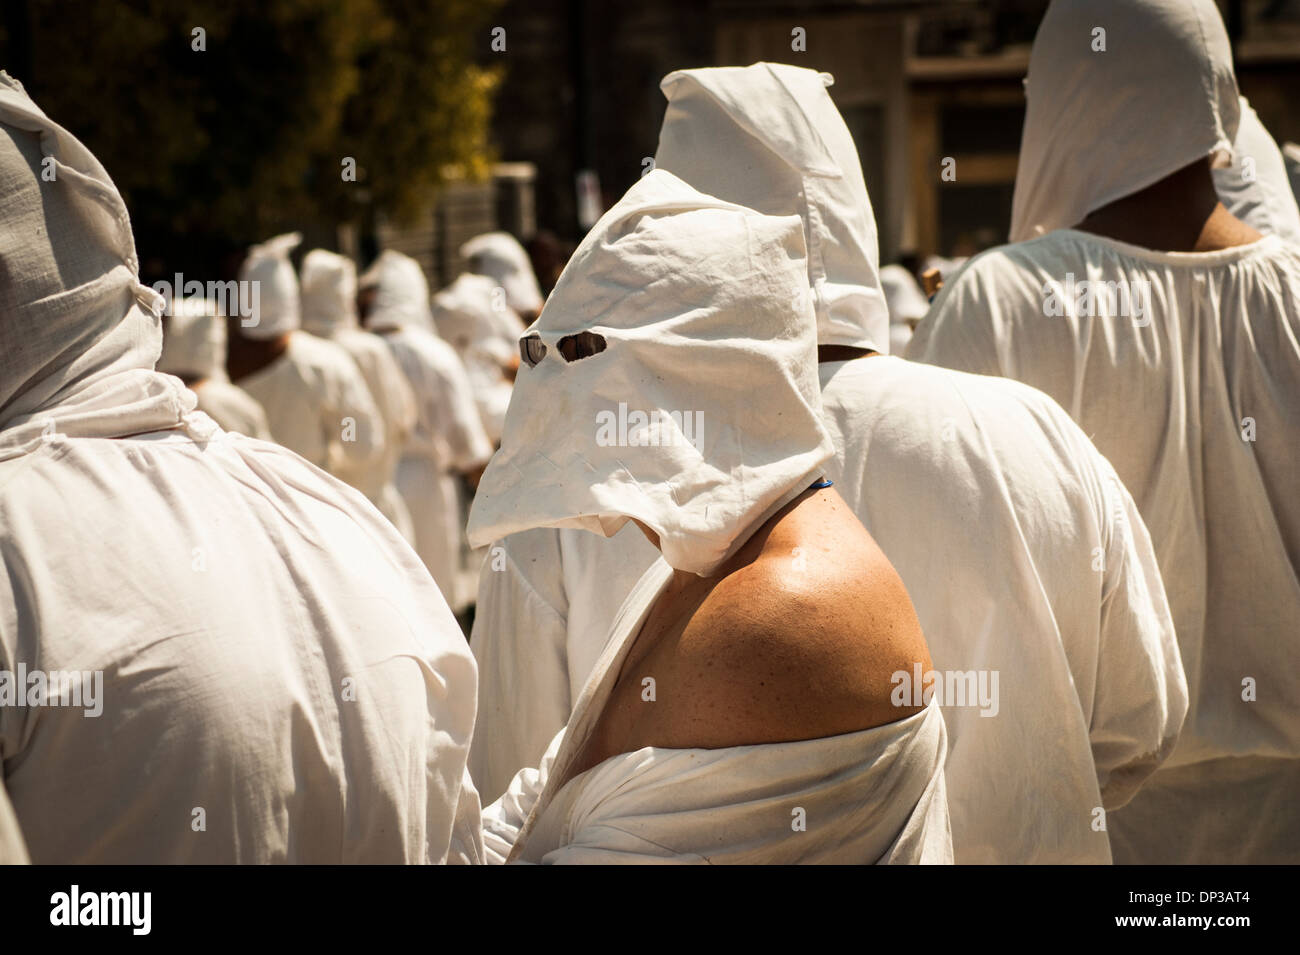 Penitents during the bloody procession for the Assumption of the Virgin Mary in Guardia Sanframondi, Campania, Italy Stock Photo